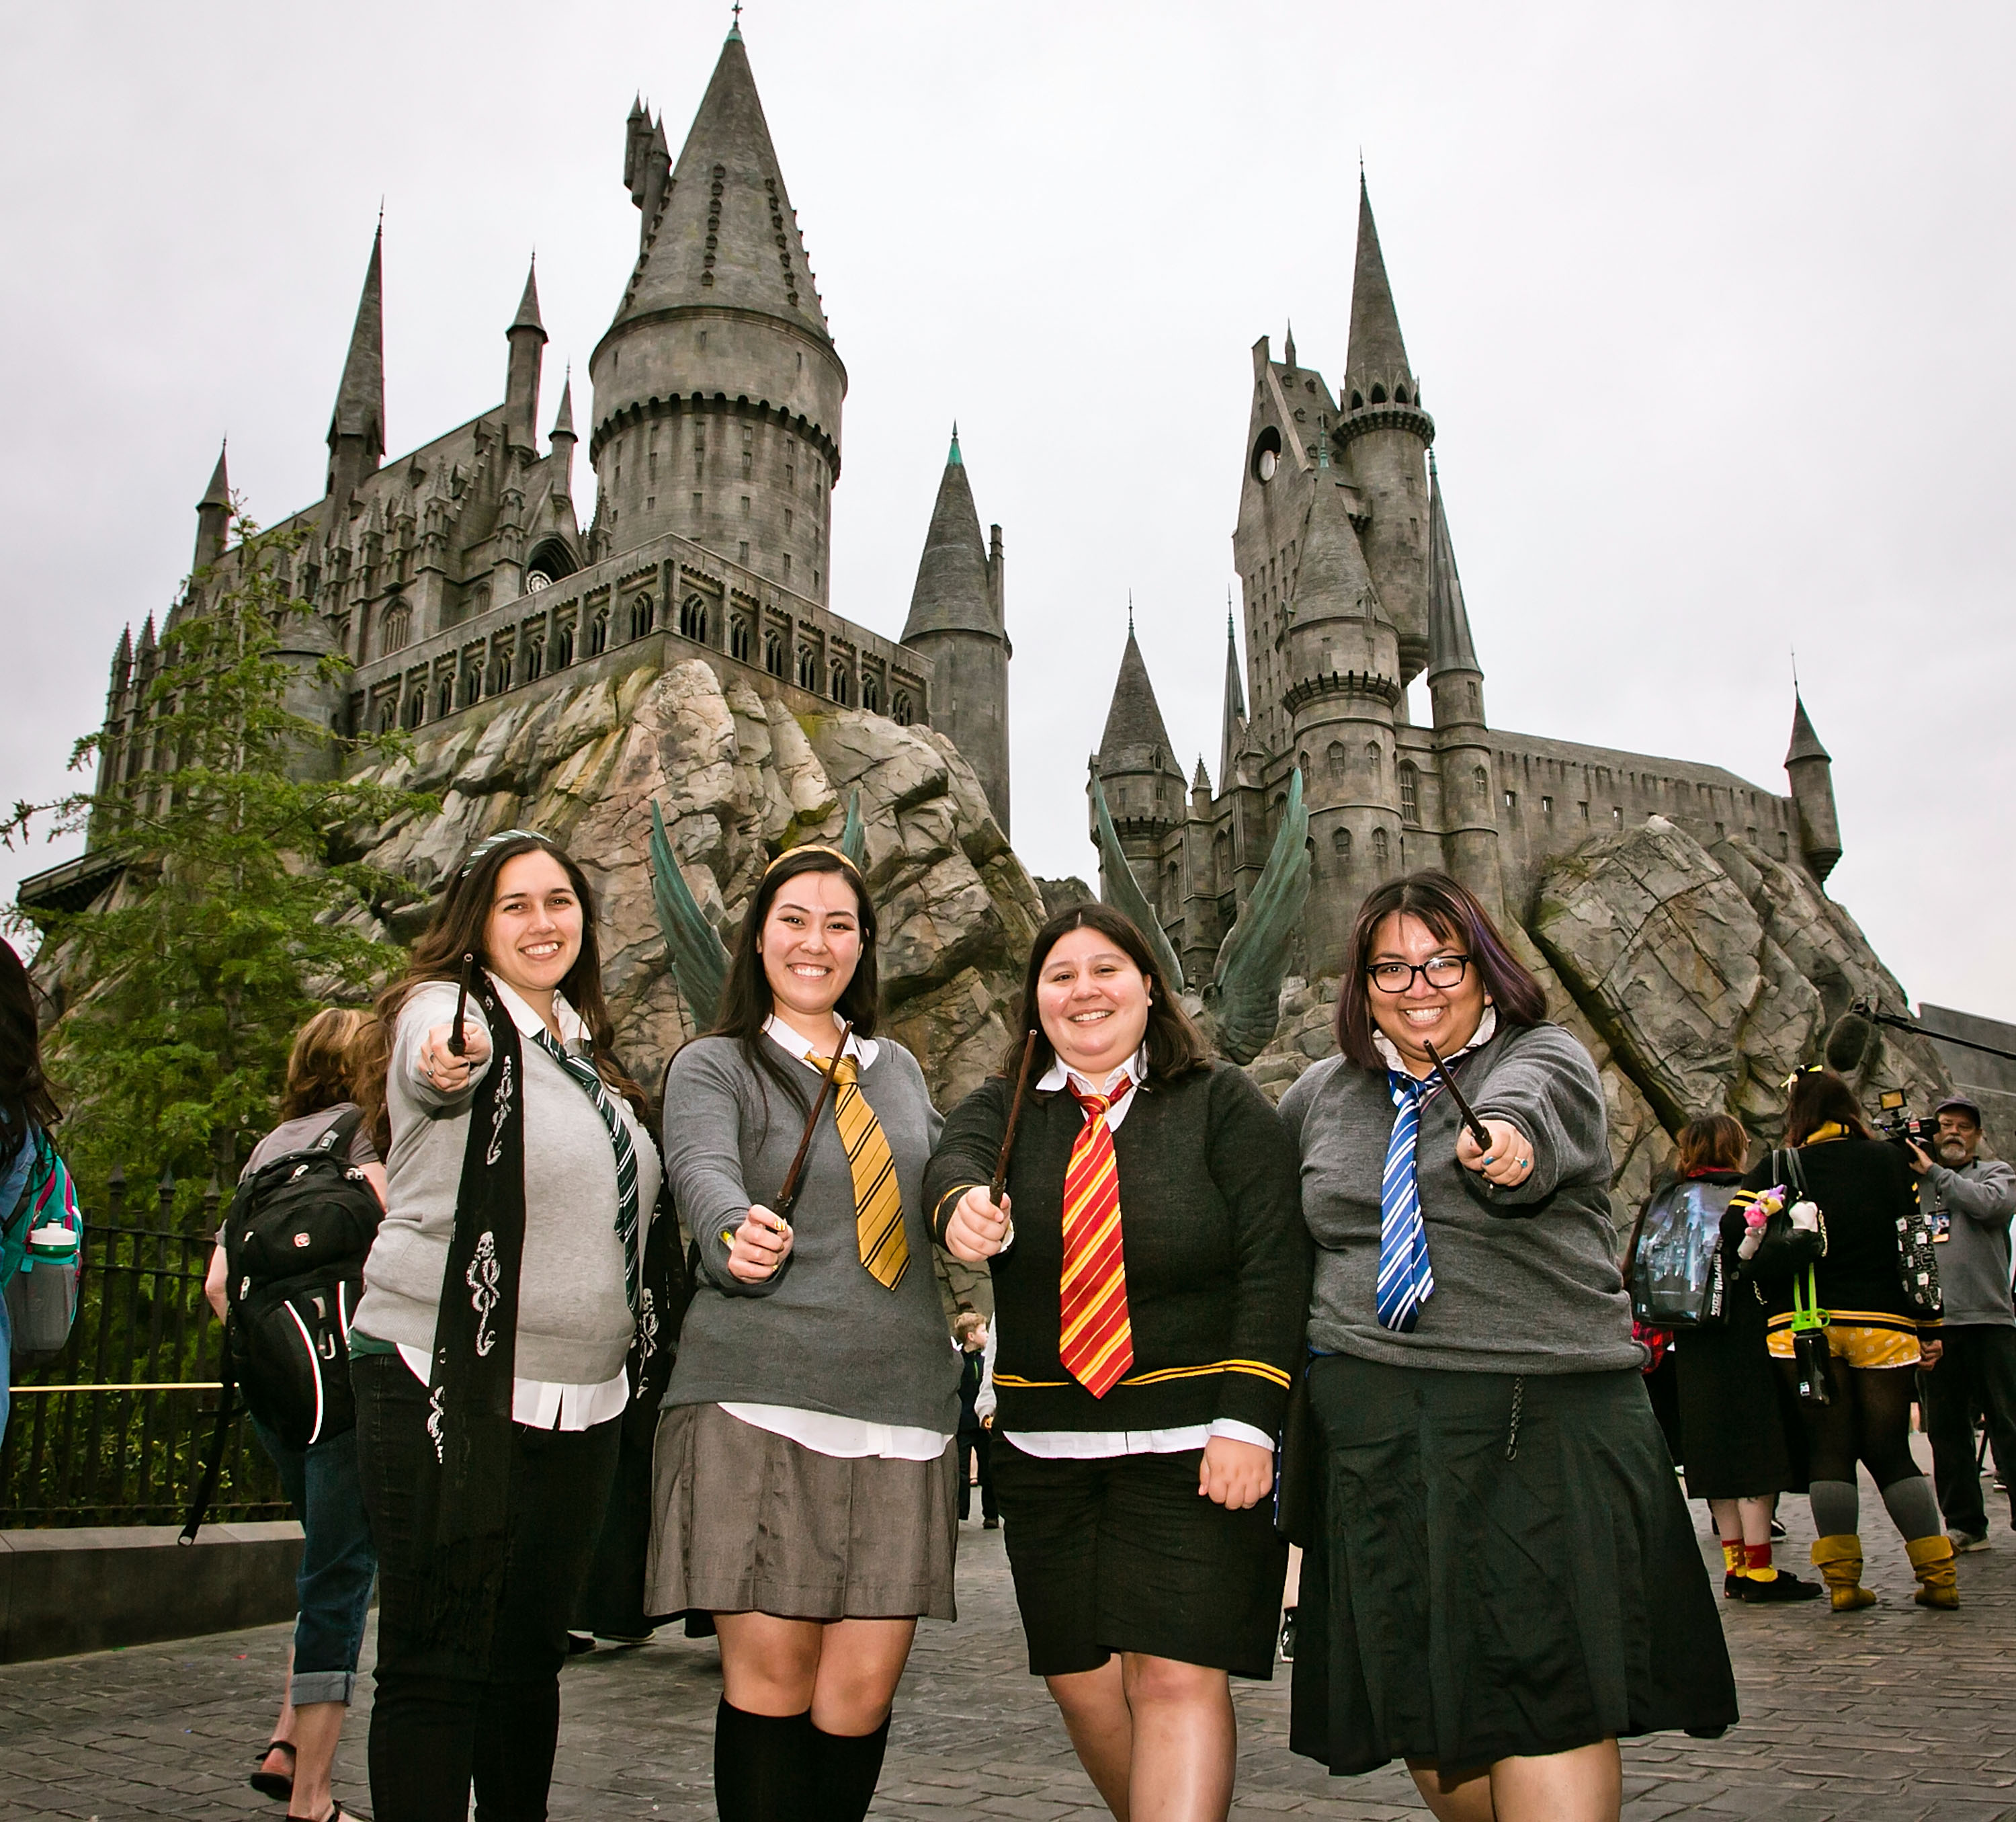 Dressed-up fans at the 2016 opening of “The Wizarding World Of Harry Potter” at Universal Studios Hollywood.